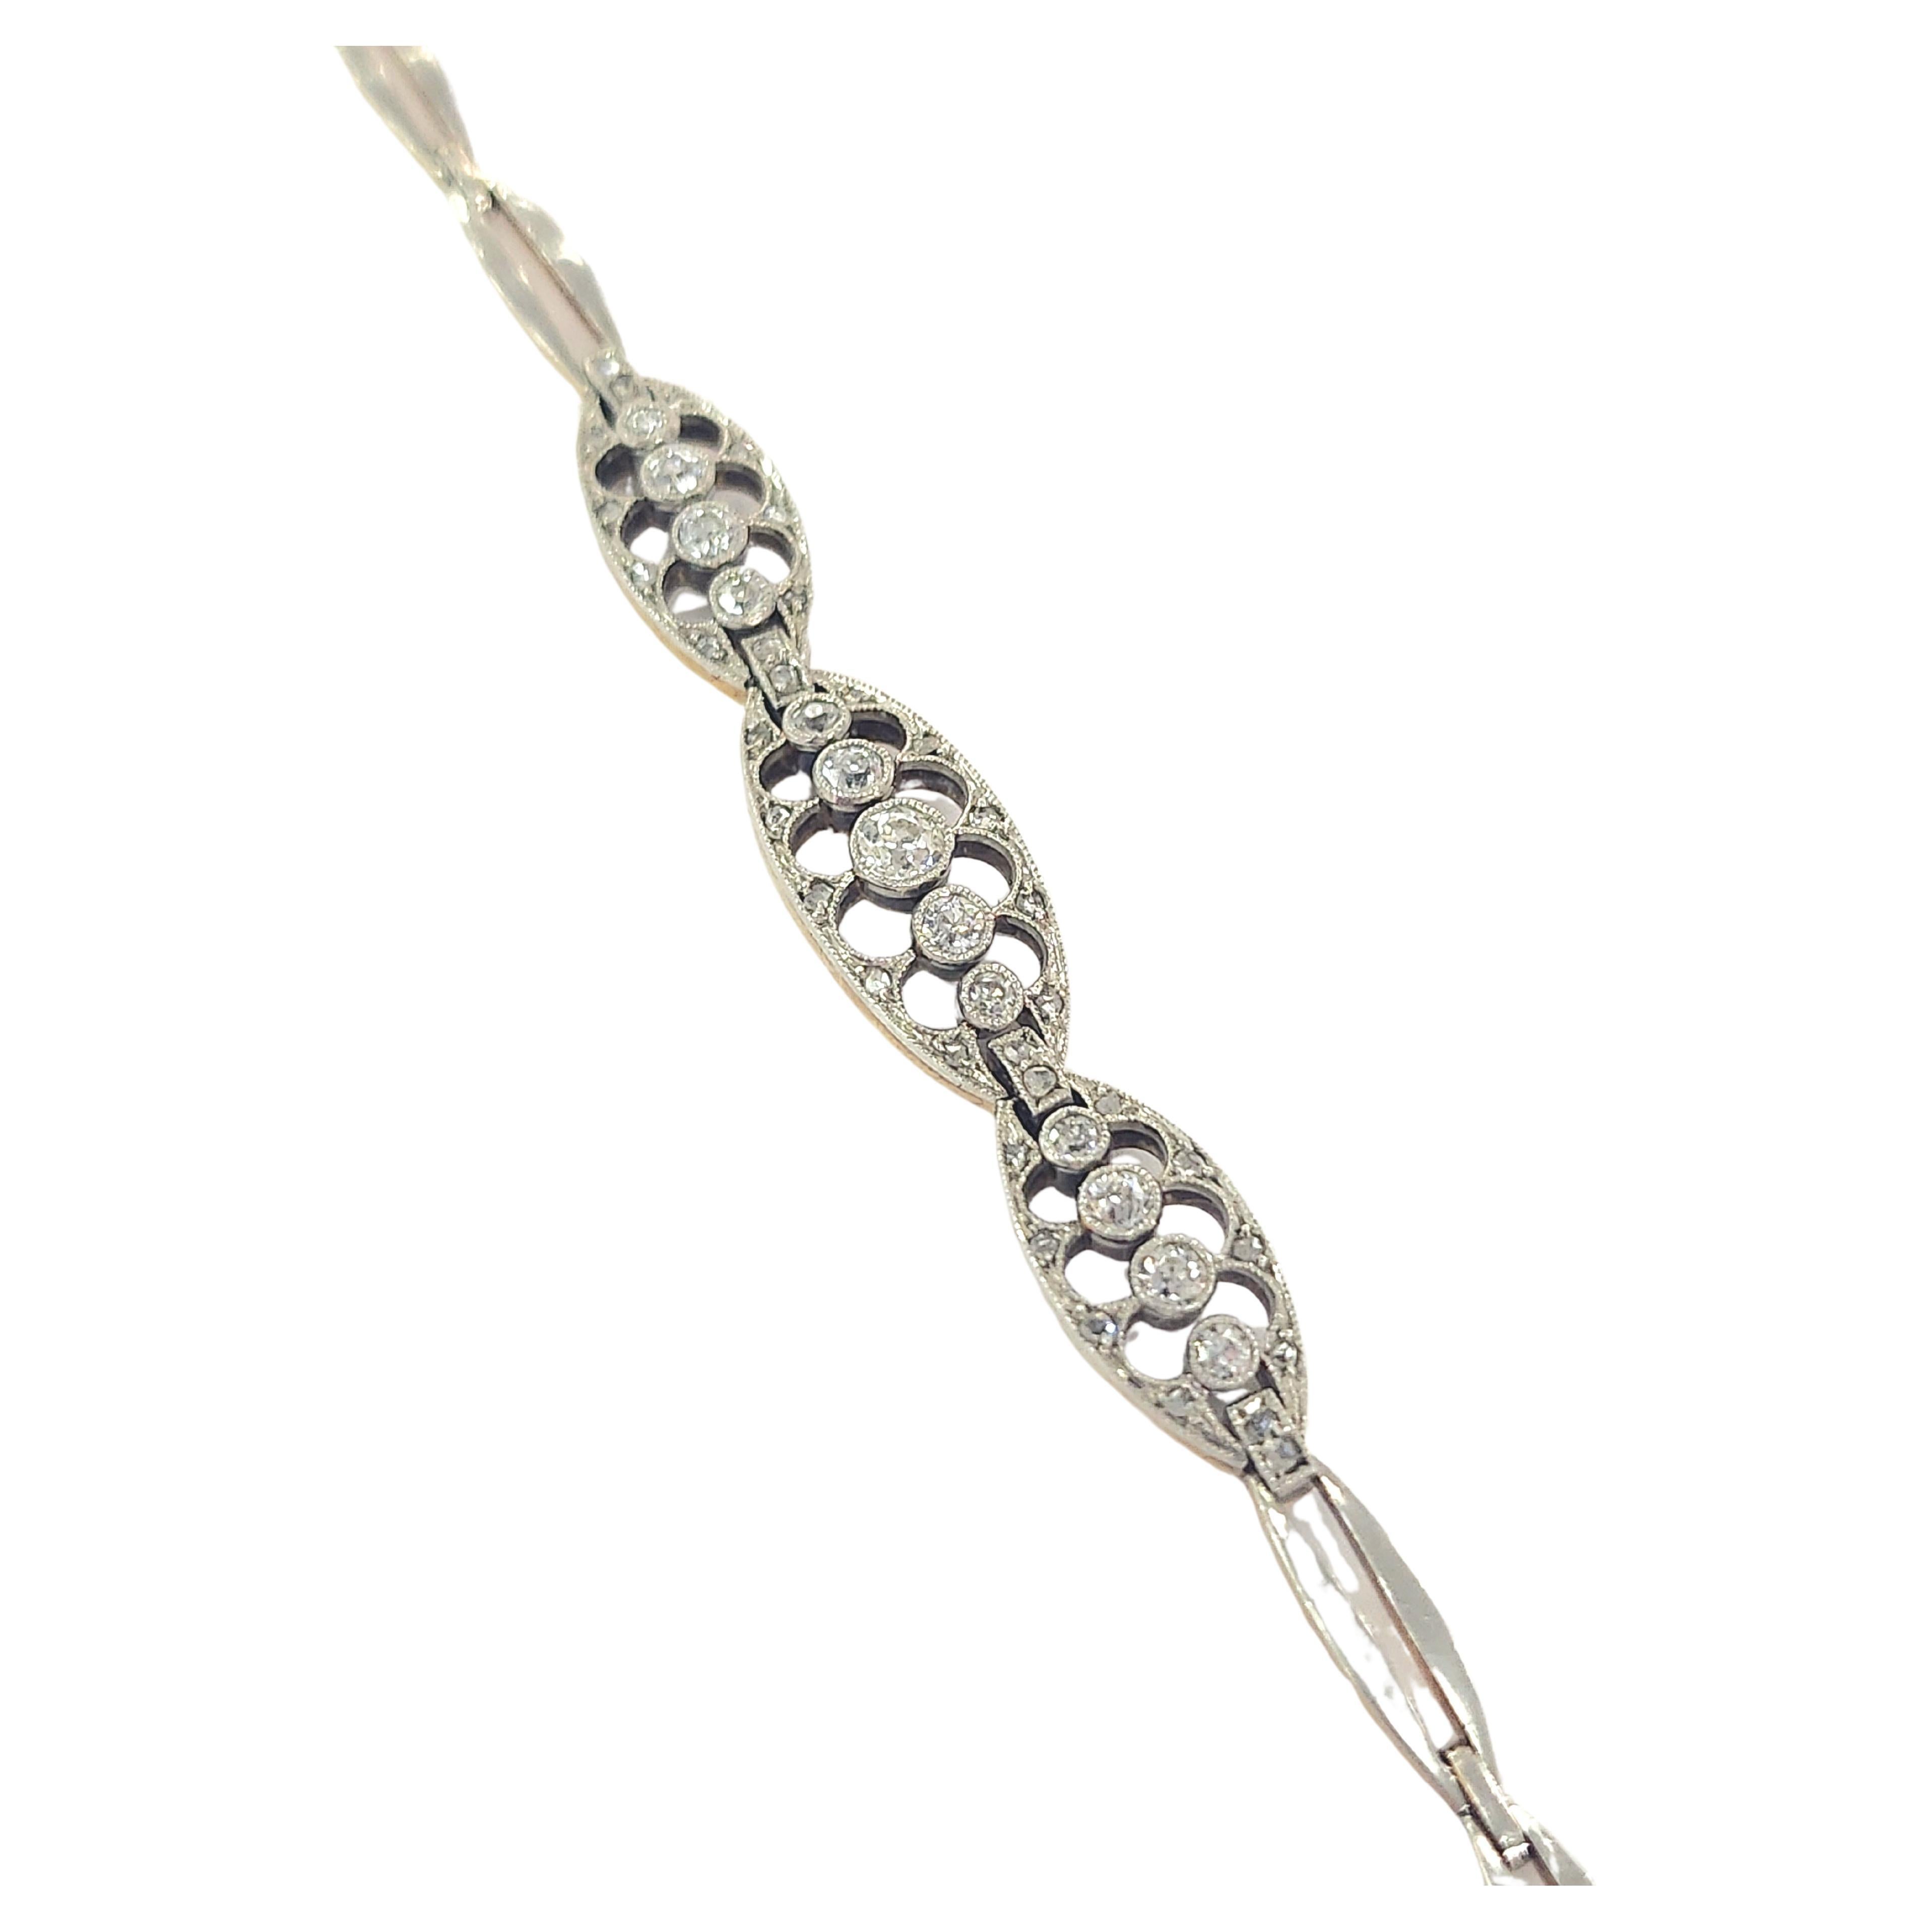 1920s Russian era delicate bracelet made in moscow 1920s in open work style 14k yellow gold topped with platinum centered with old mine cut diamonds estimate weight of 1.20 carats H color white vs clearity excellent spark hall marked 583 14k gold